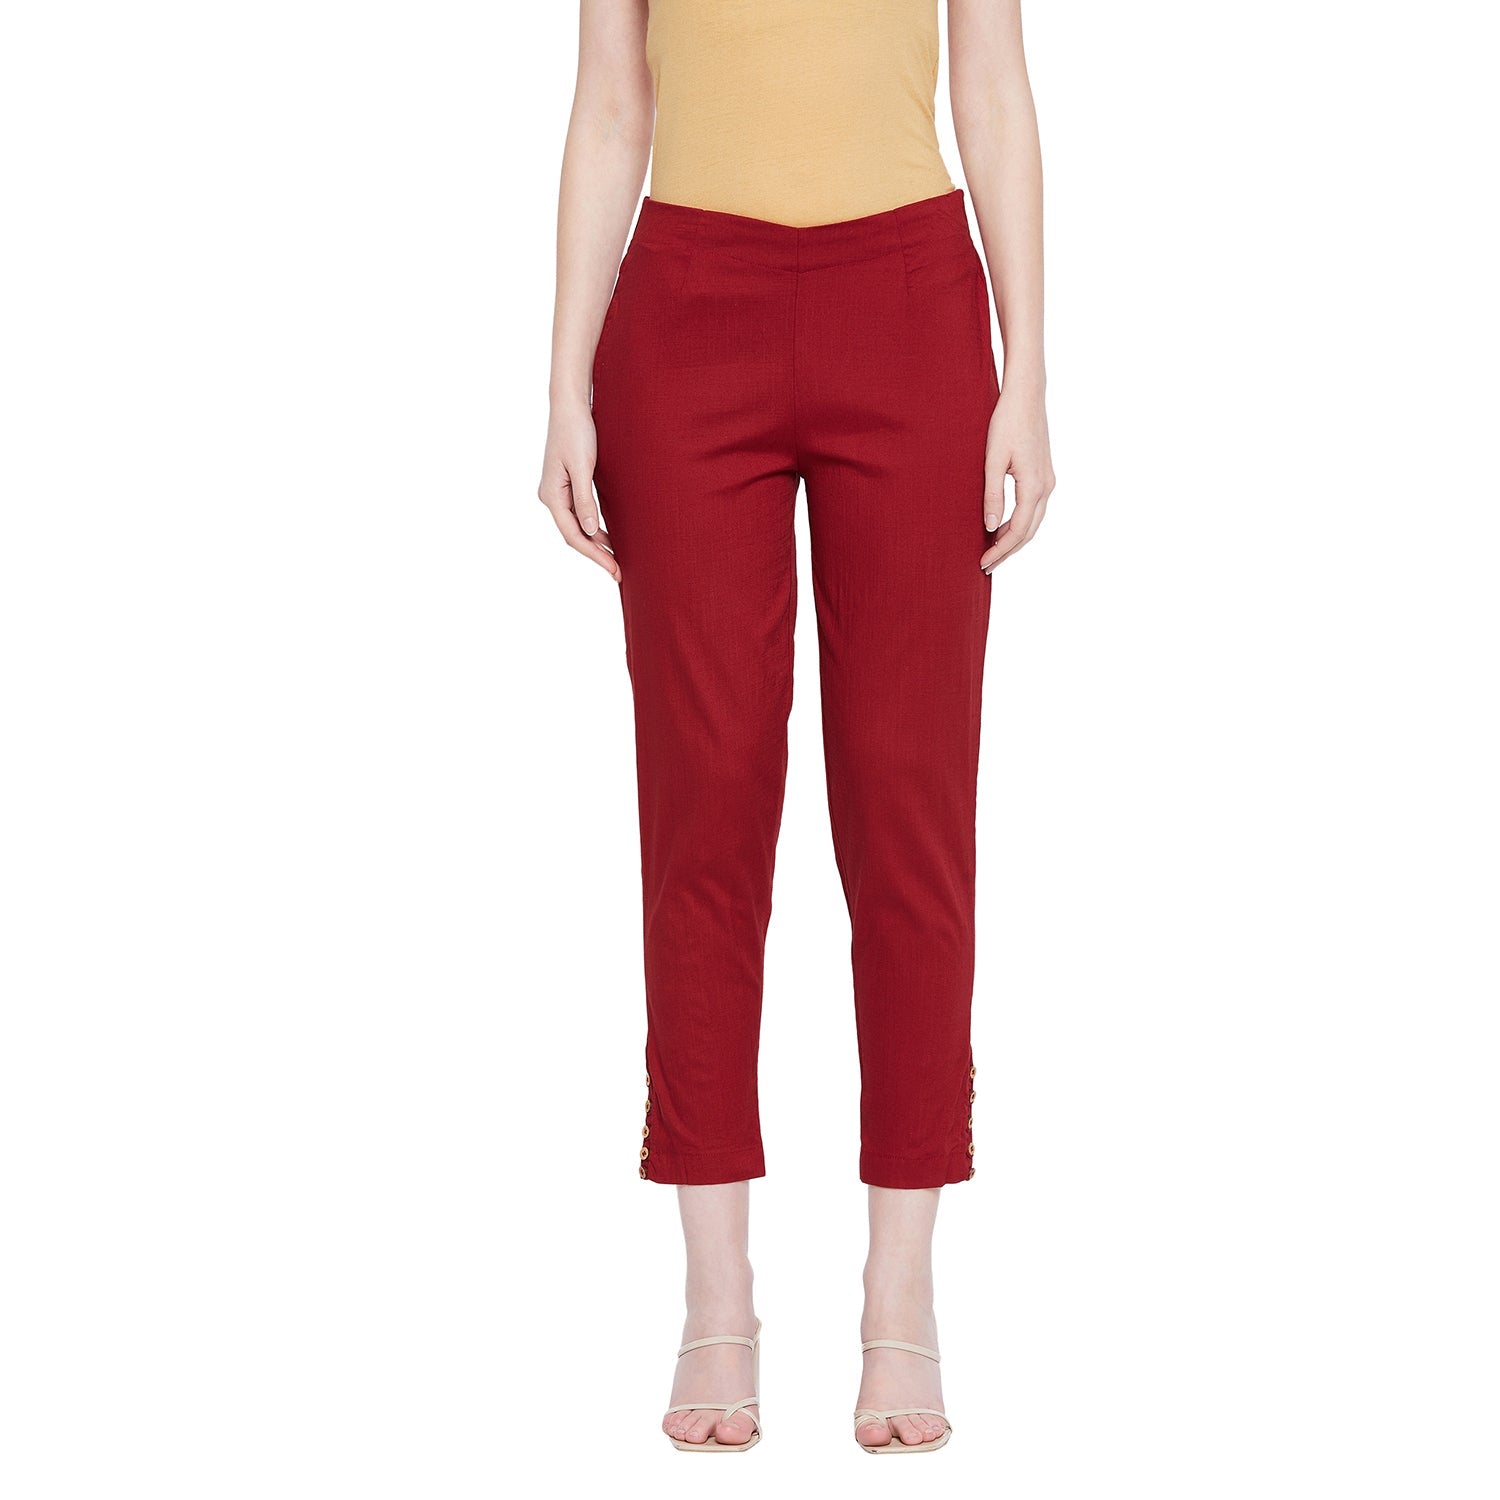 All Womenswear | Trendy professional outfits, Trousers women, Reiss fashion